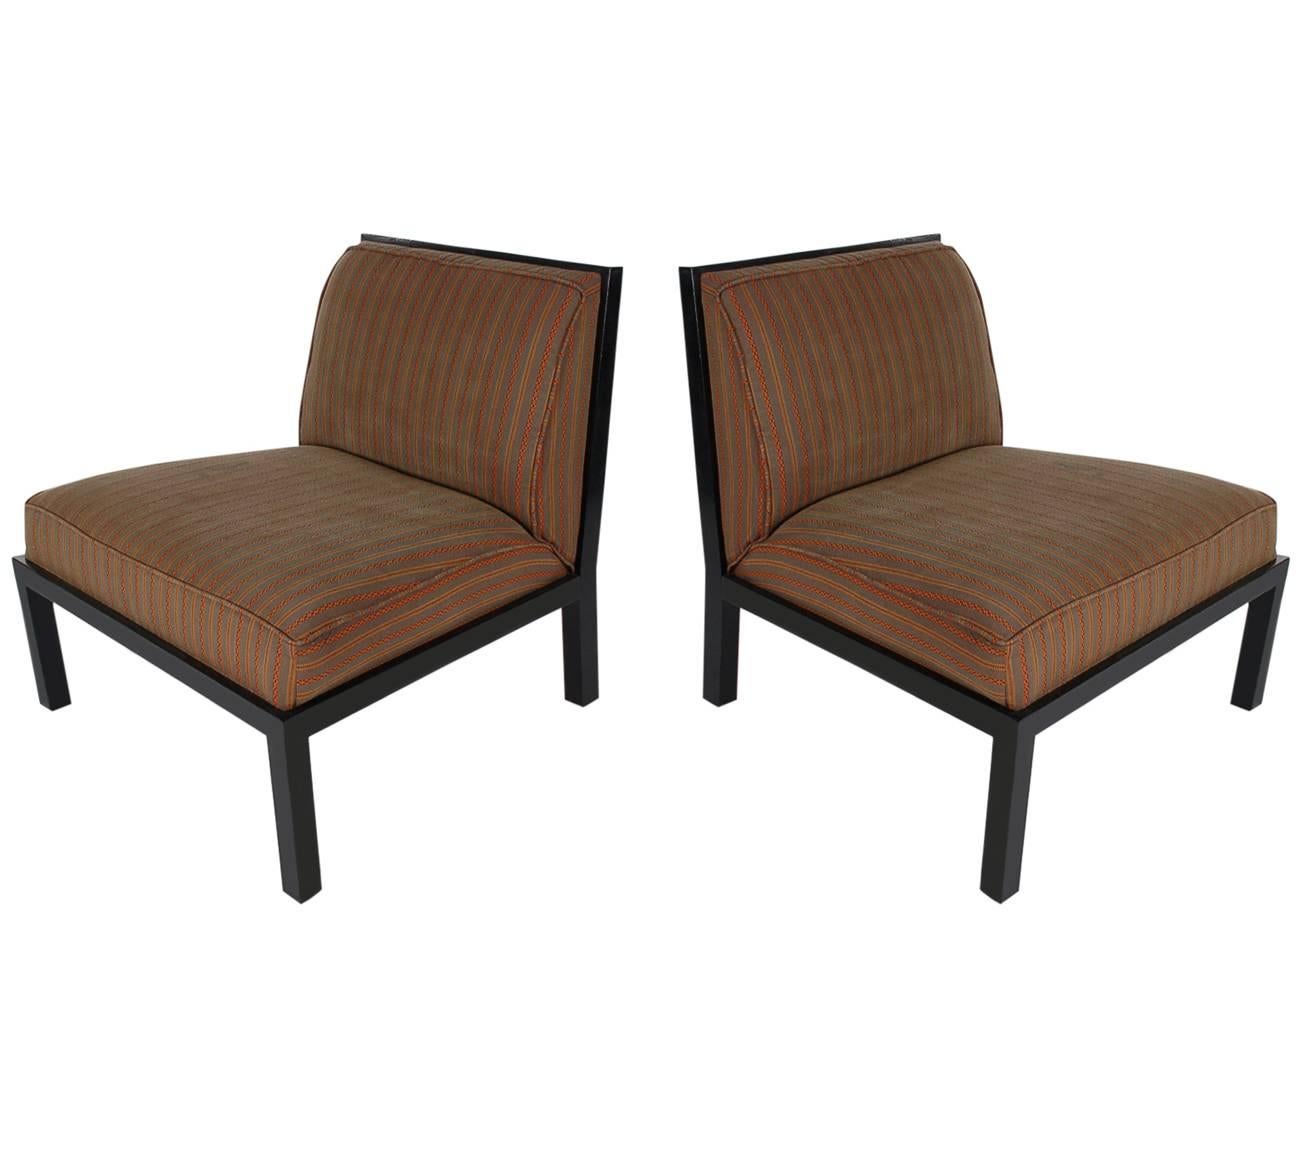 A handsome matching pair of slipper lounge chairs designed by Michael Taylor and produced by Baker Furniture. These feature ebony wood frames with beautiful lattice backs. Fabric is worn and needs recovering. Upholstery services are available at